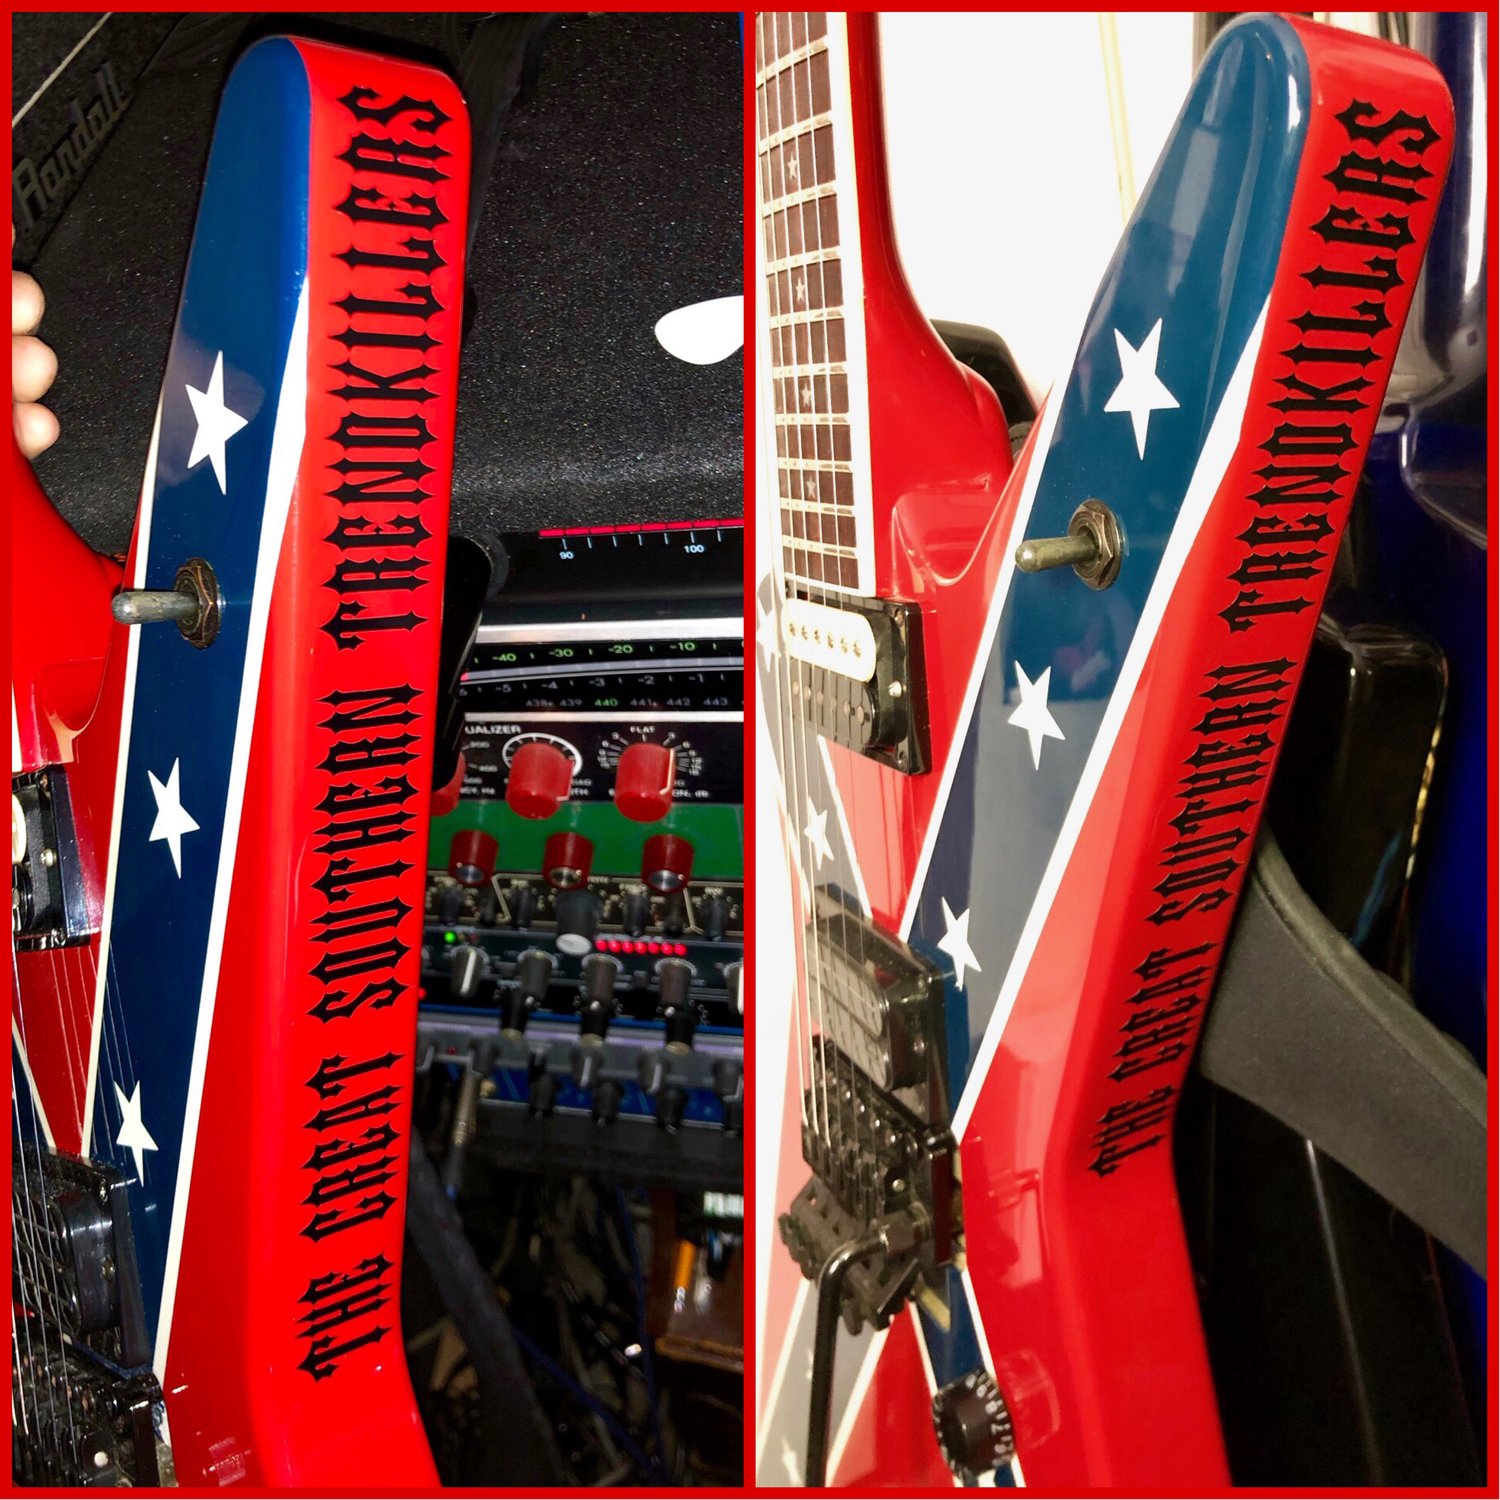 Image of Dimebag “The Great Southern Trendkillers” Sticker 